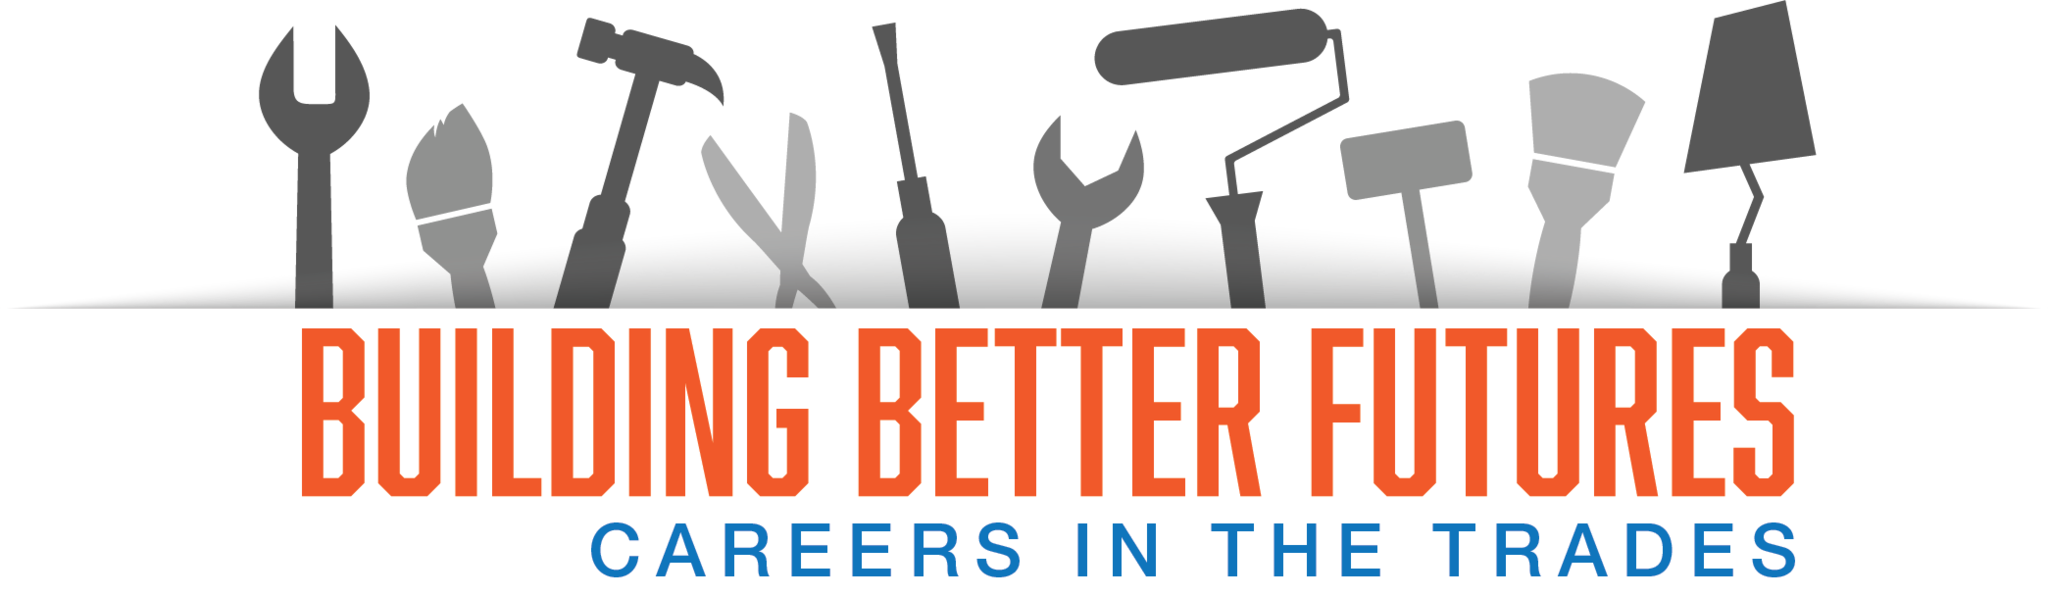 Building Better Futures - Careers in the Trades